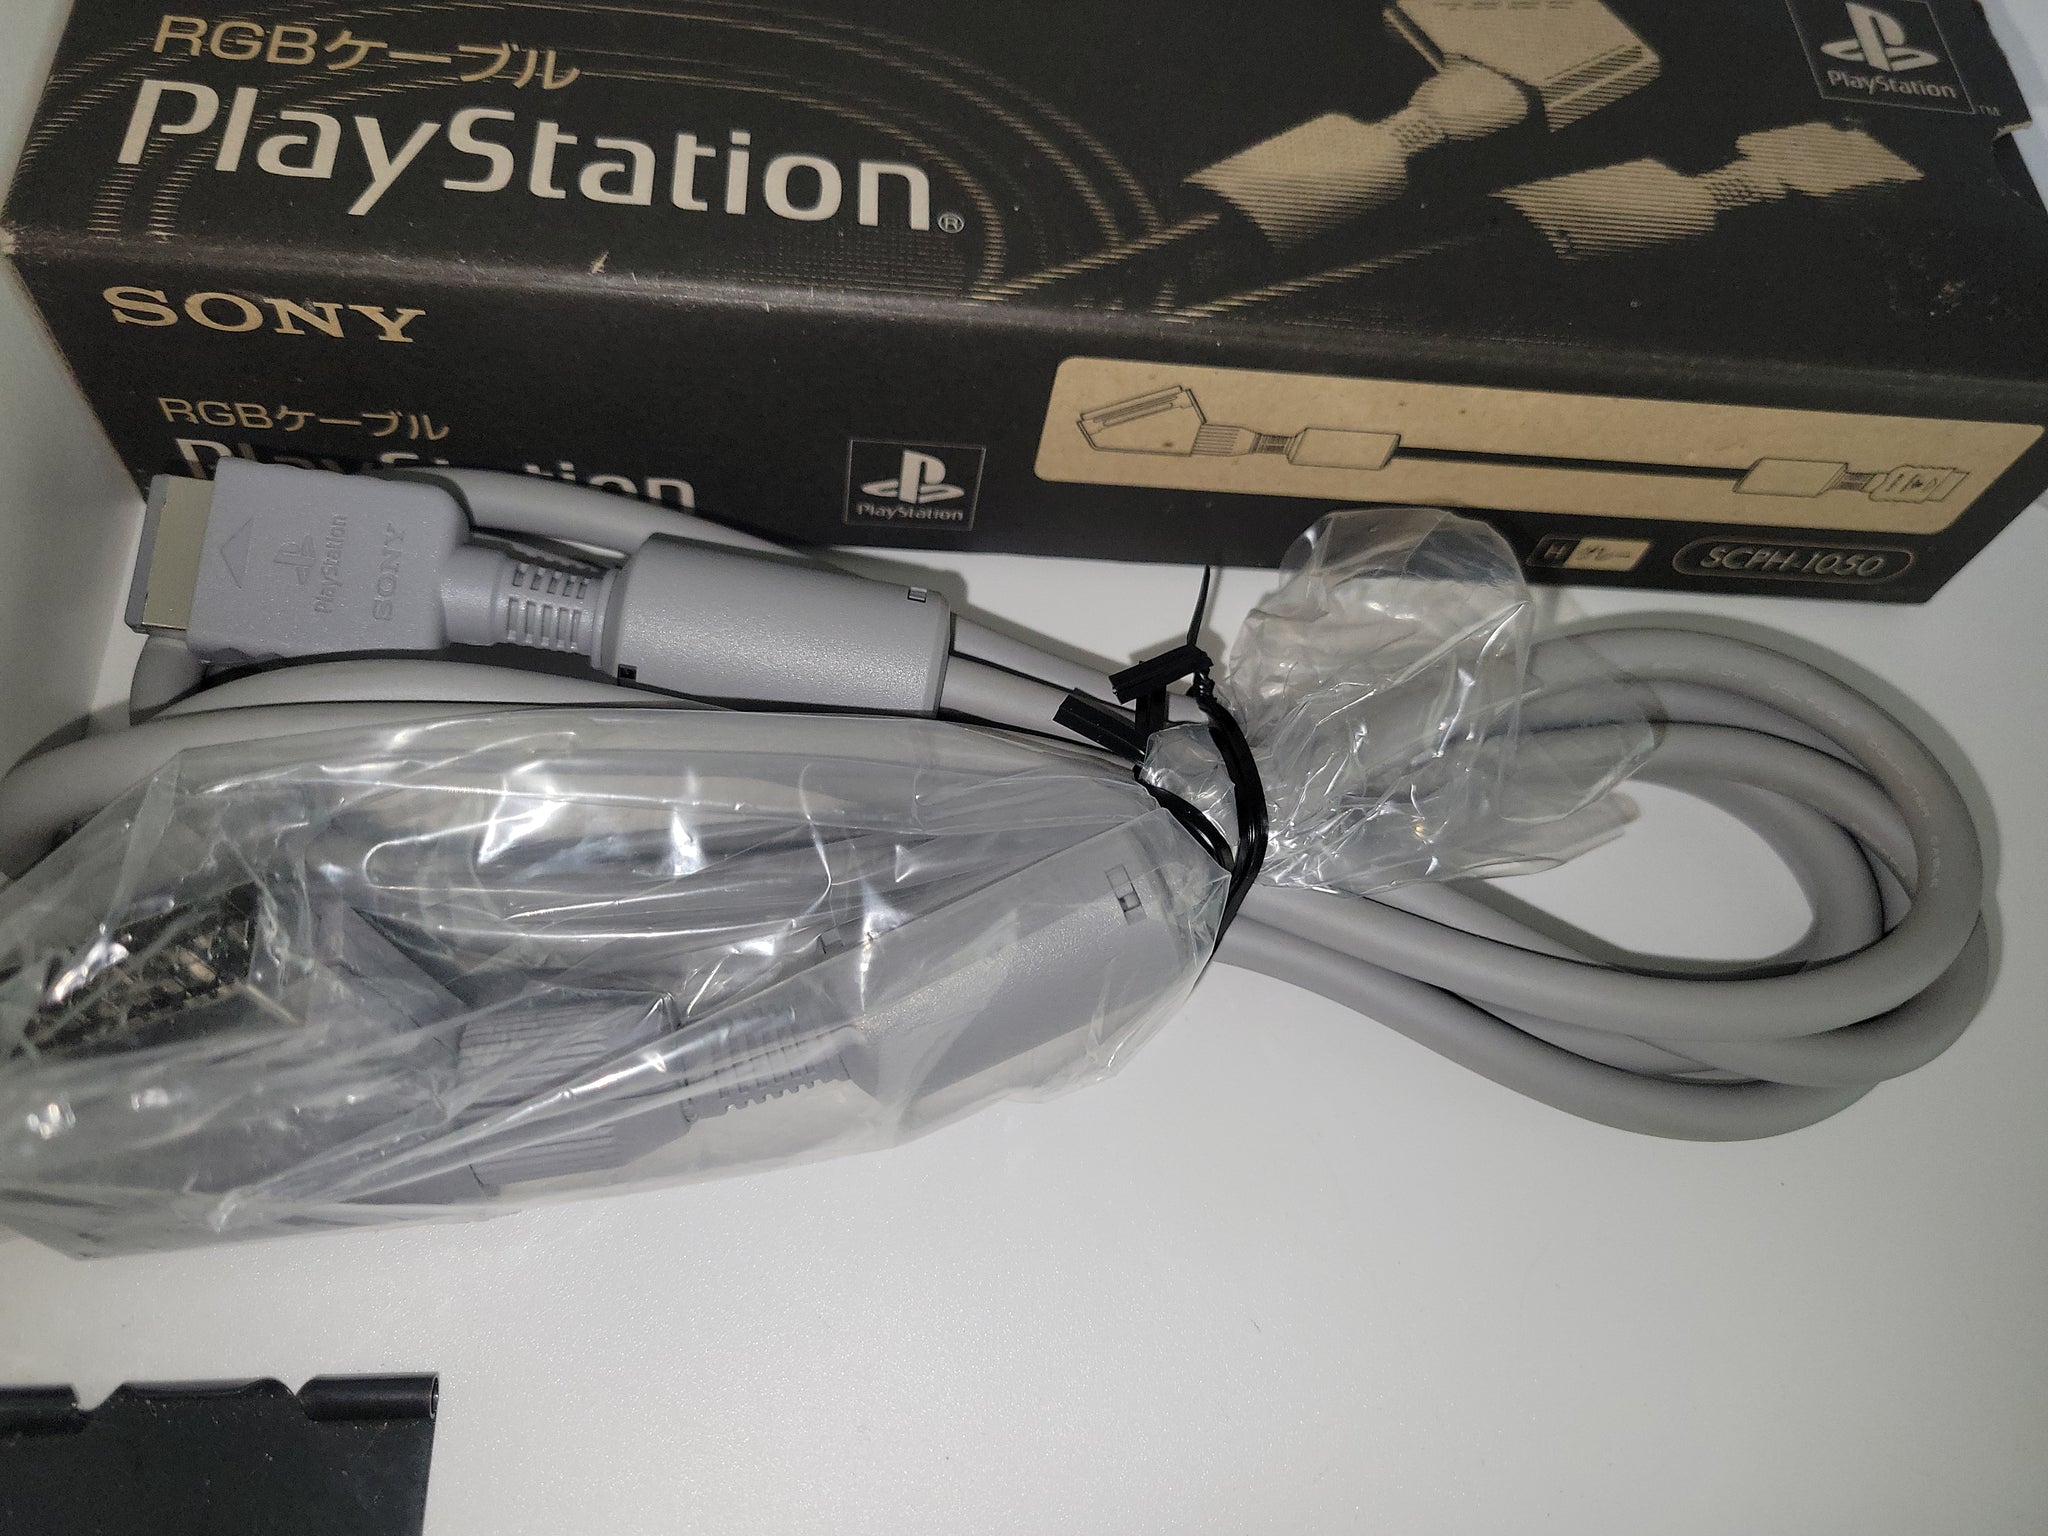 Sony Original Scph-1050 RGB (japan) Cable - Sony PS1 Playstation 